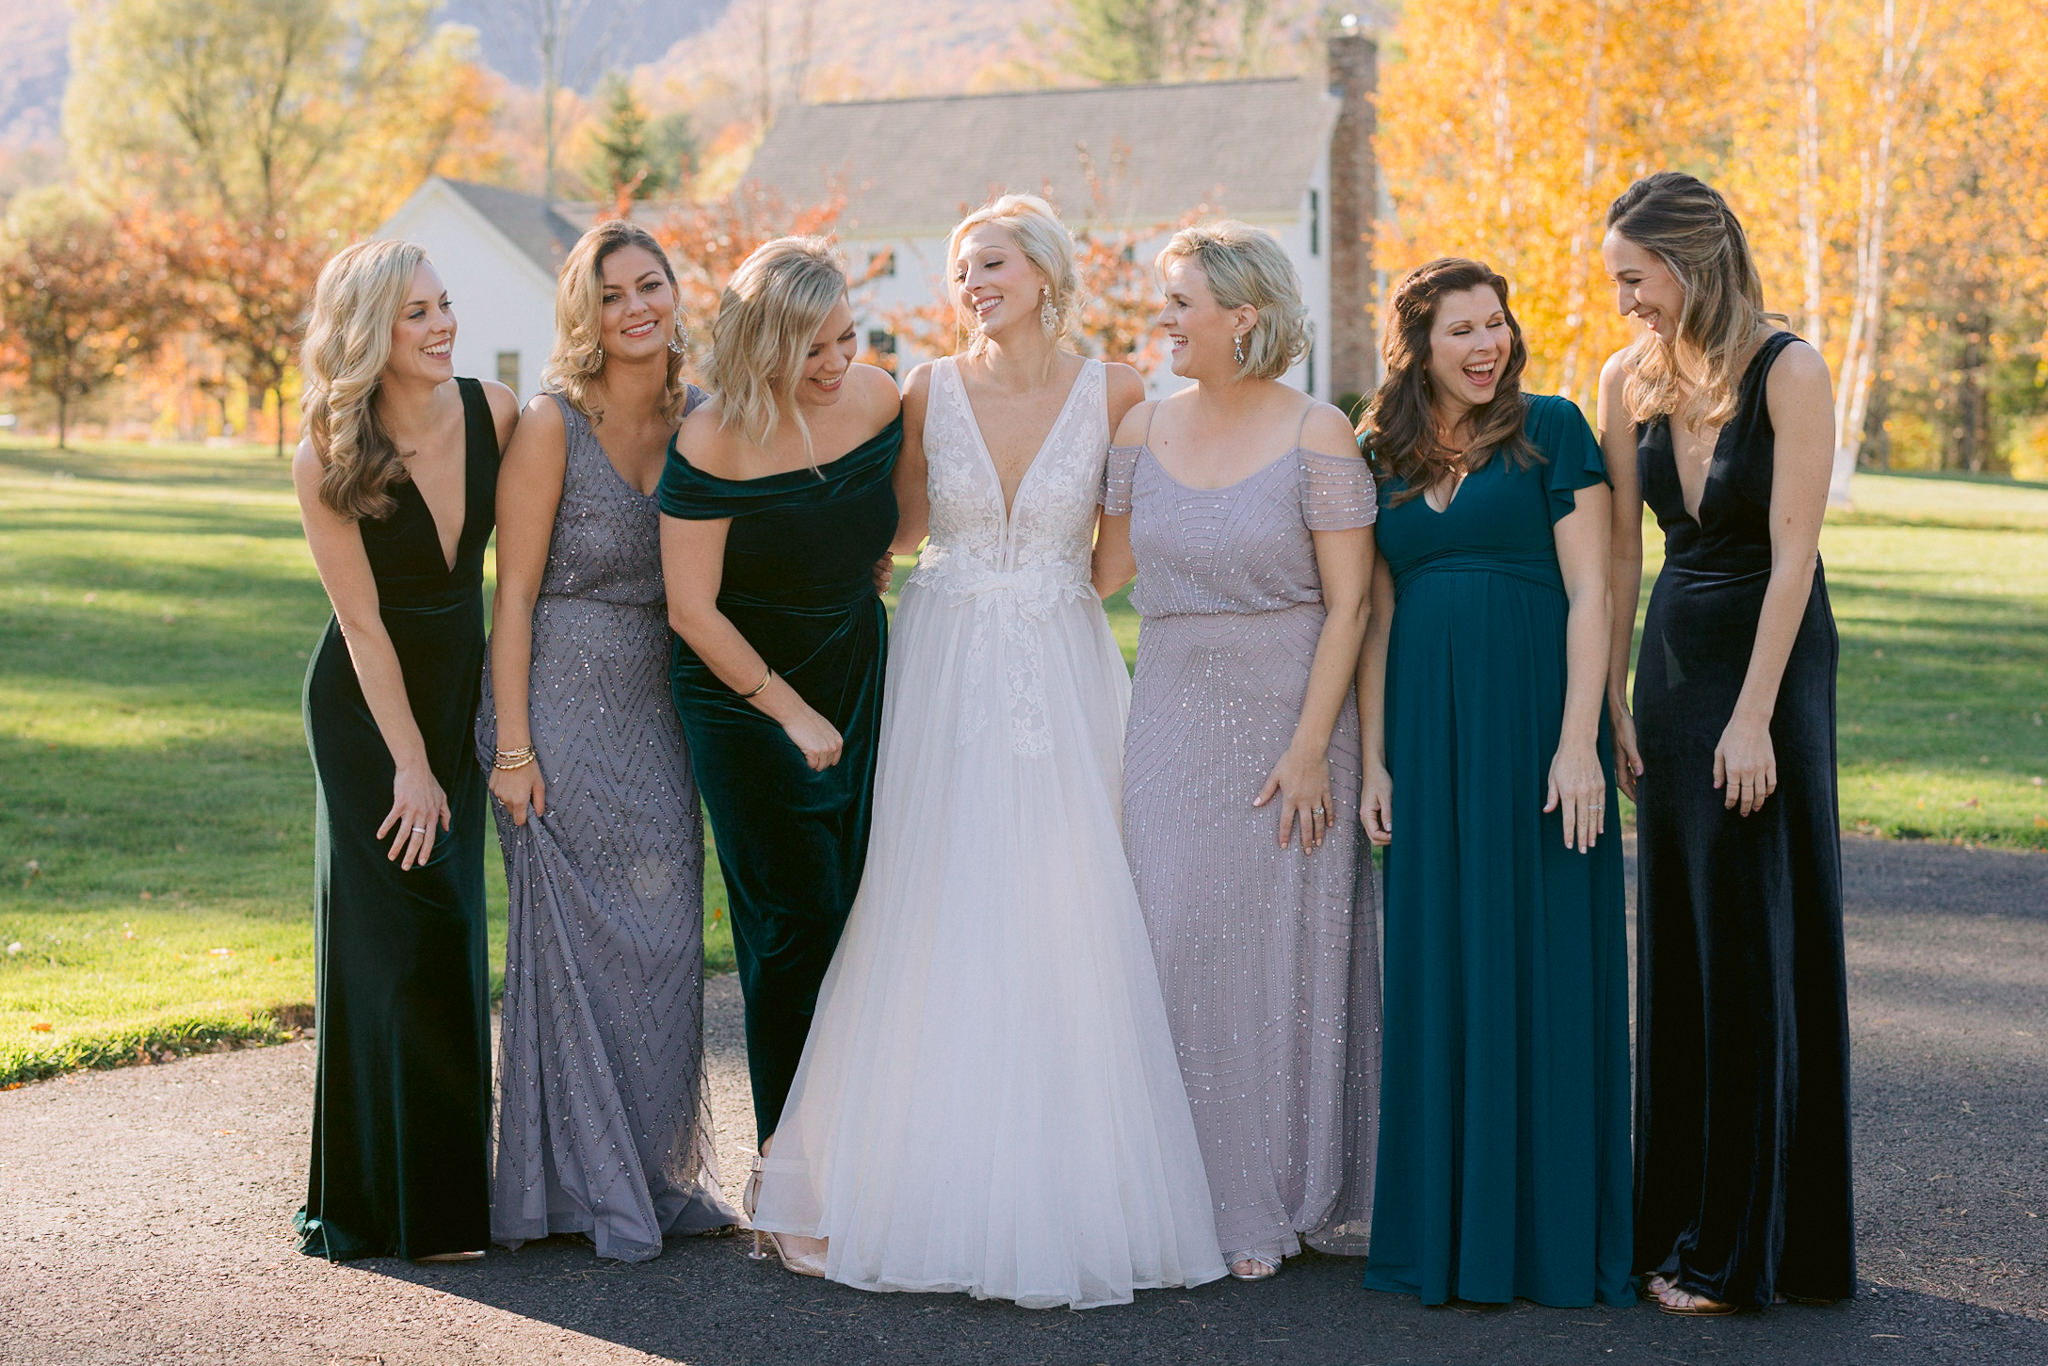 Outdoor wedding, bride and bridesmaids, mismatched dresses